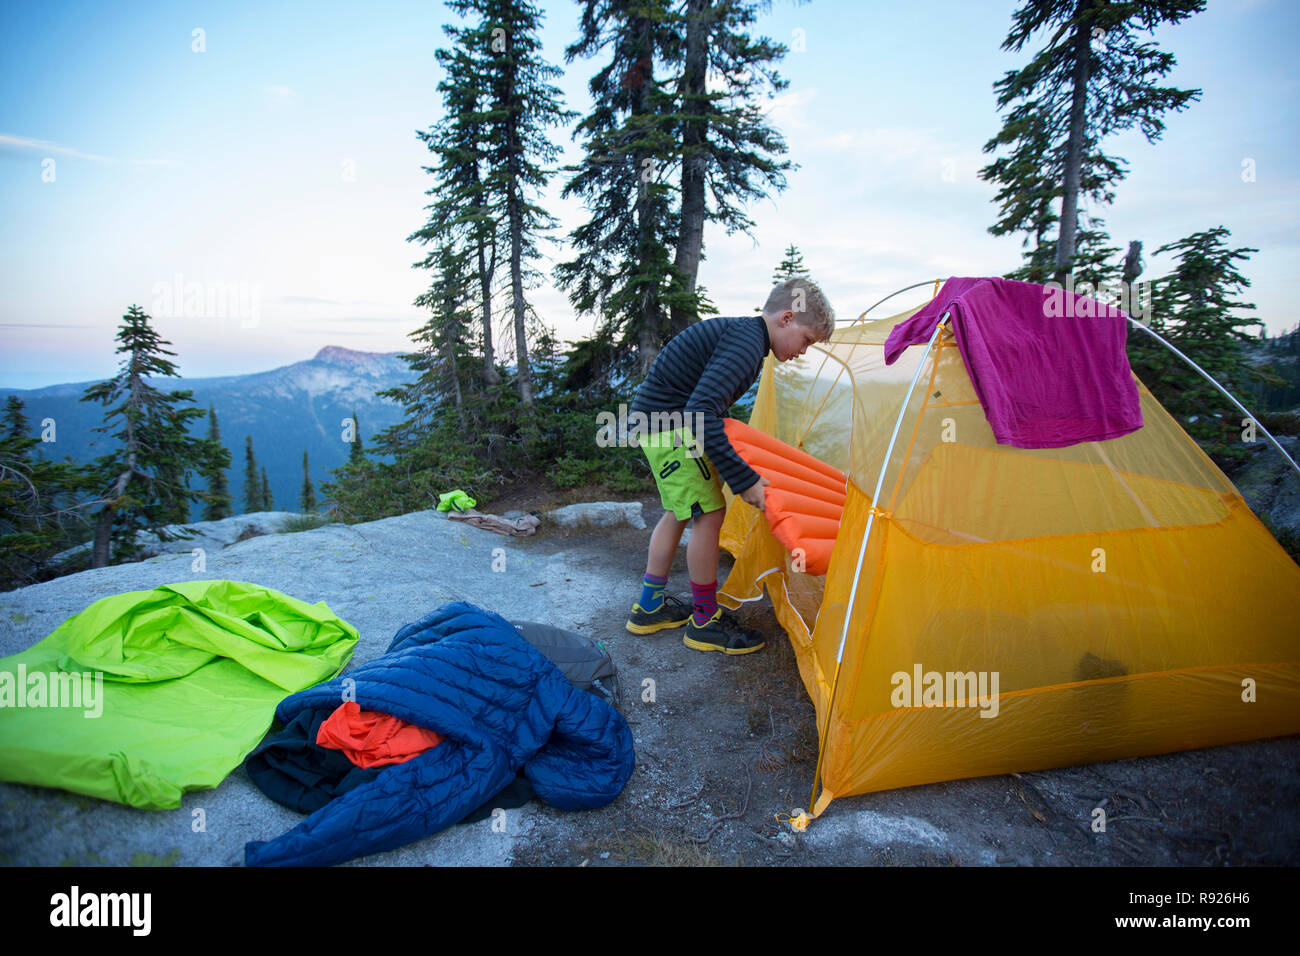 Photograph of a 10 year old boy near a tent preparing for camping, Selkirk Mountains, Sandpoint, Idaho, USA Stock Photo